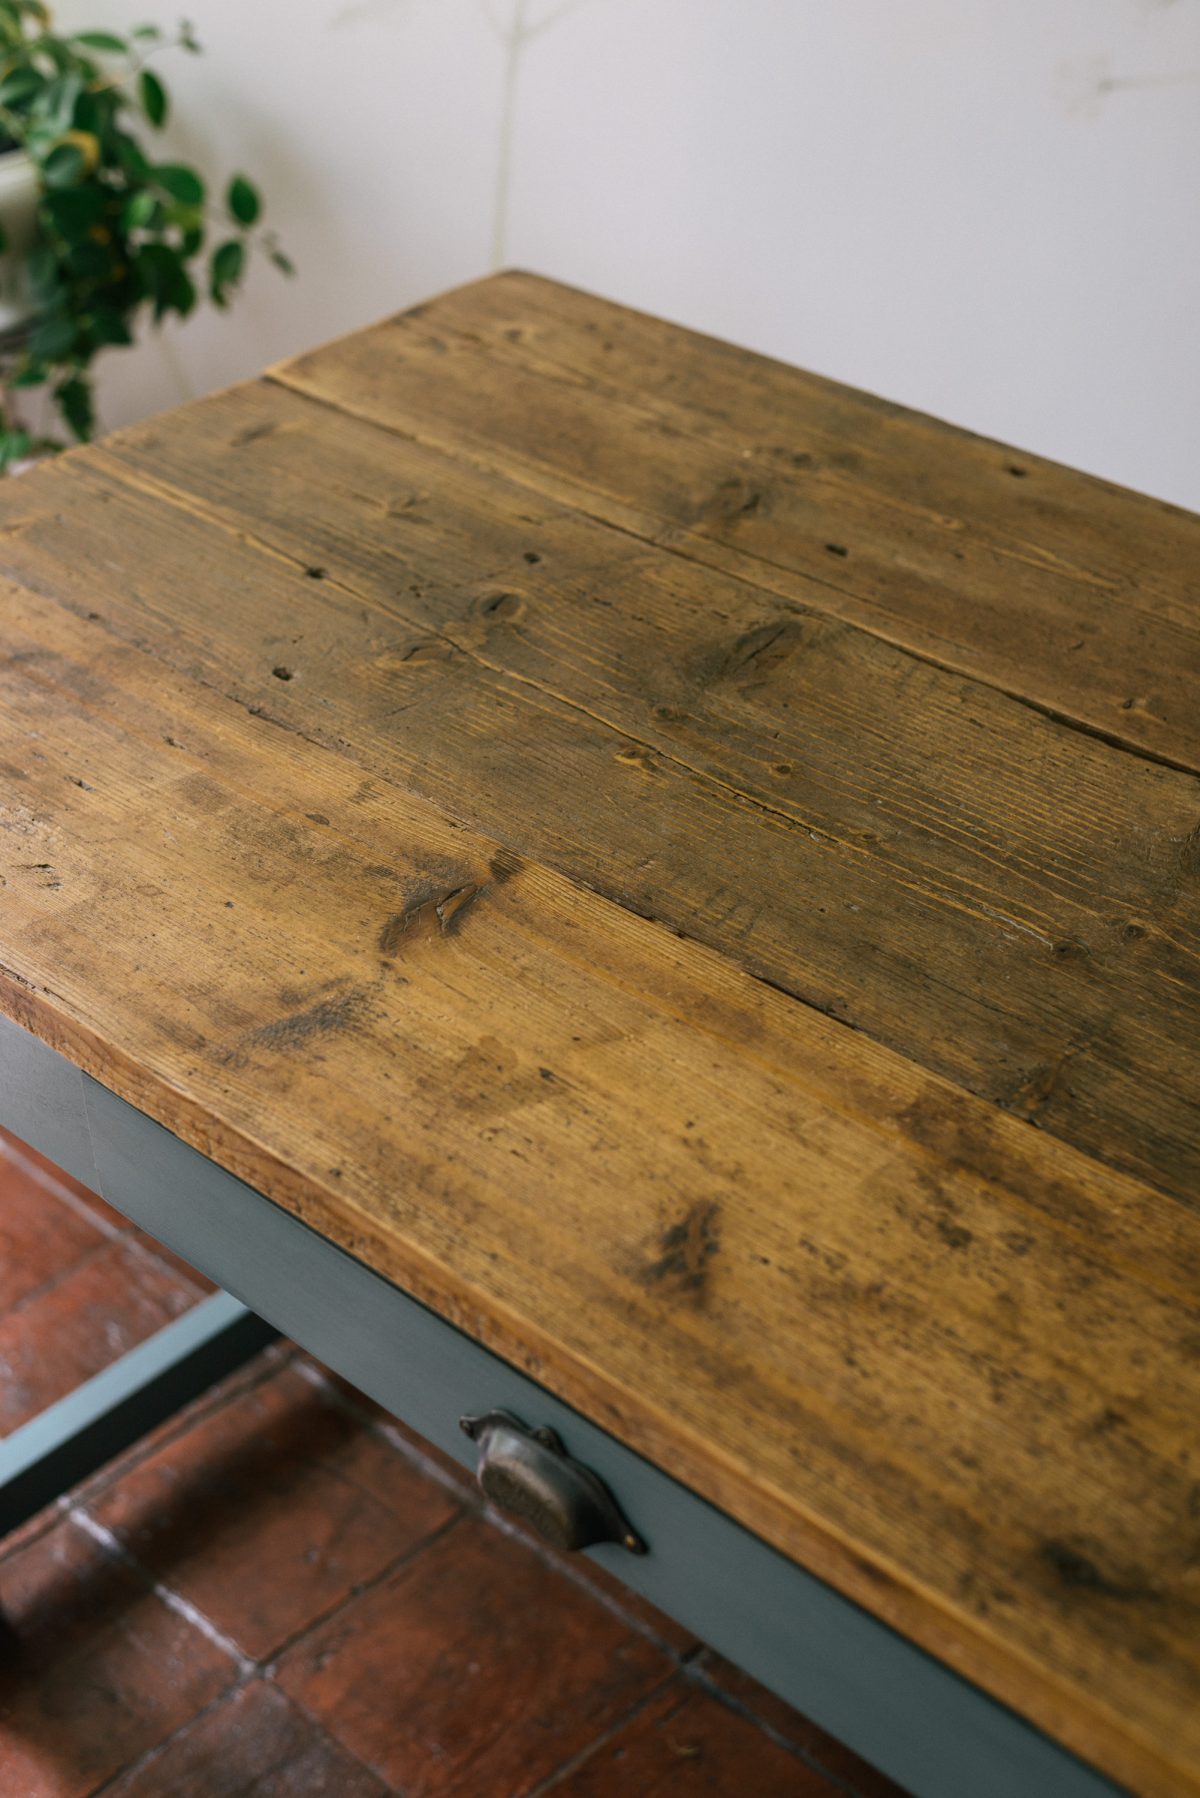 The tabletop is made from wide boards of reclaimed pine to complete the authentic, rustic look.